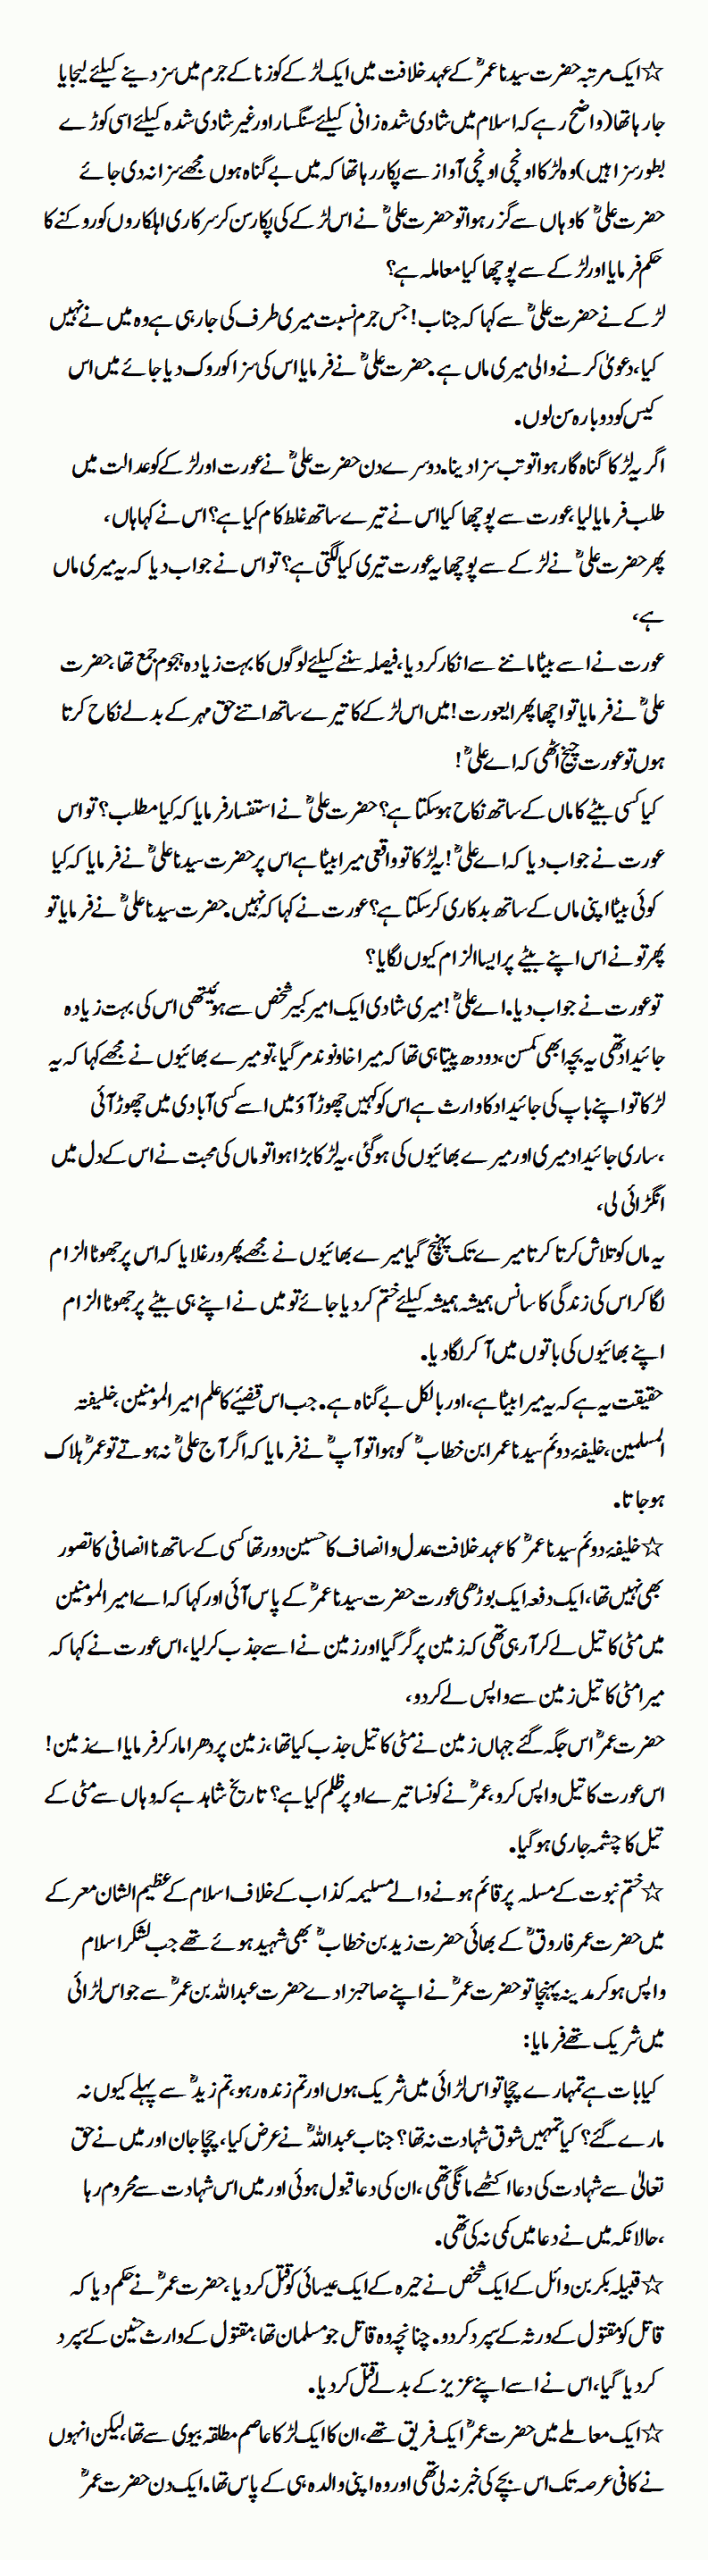 The unforgettable events of Hazrat Umar Farooqui